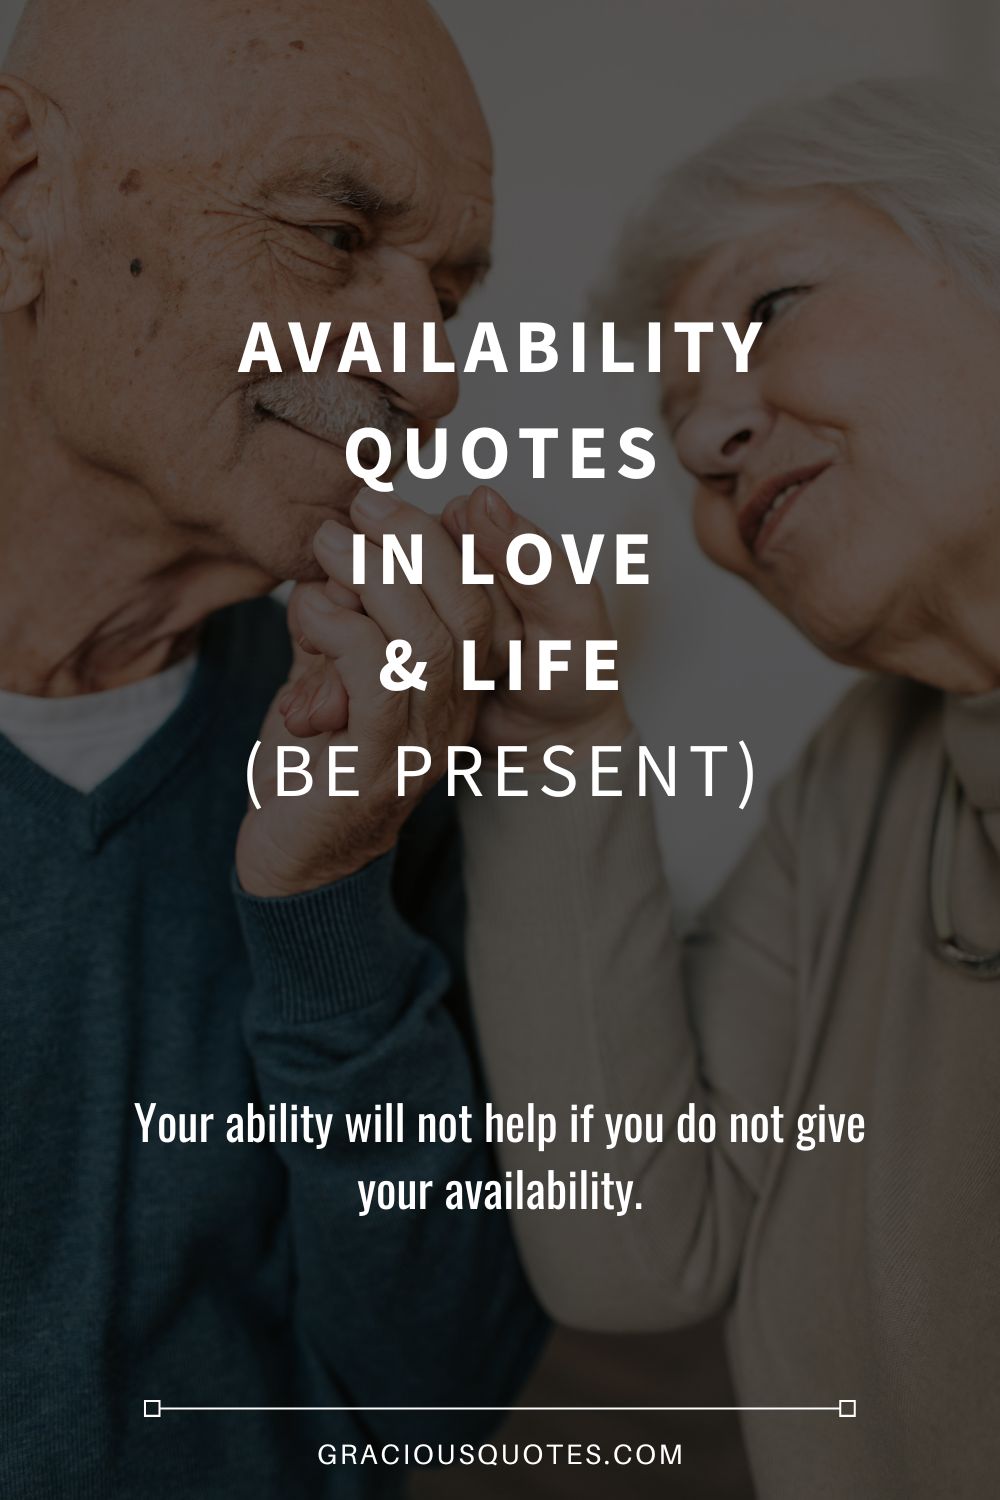 Availability Quotes in Love & Life (BE PRESENT) - Gracious Quotes